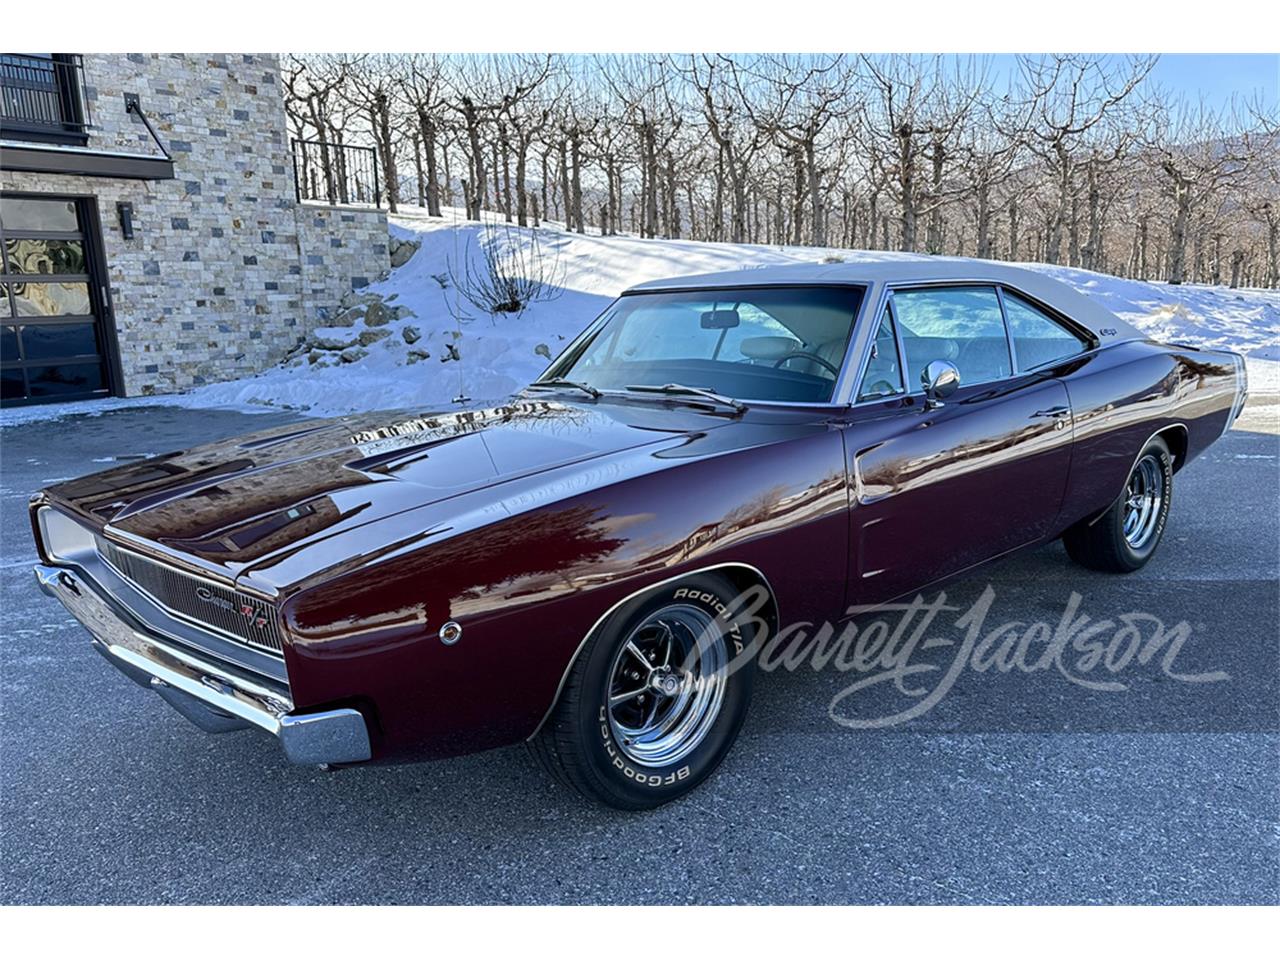 For Sale at Auction: 1968 Dodge Charger R/T in Scottsdale, Arizona for sale in Scottsdale, AZ